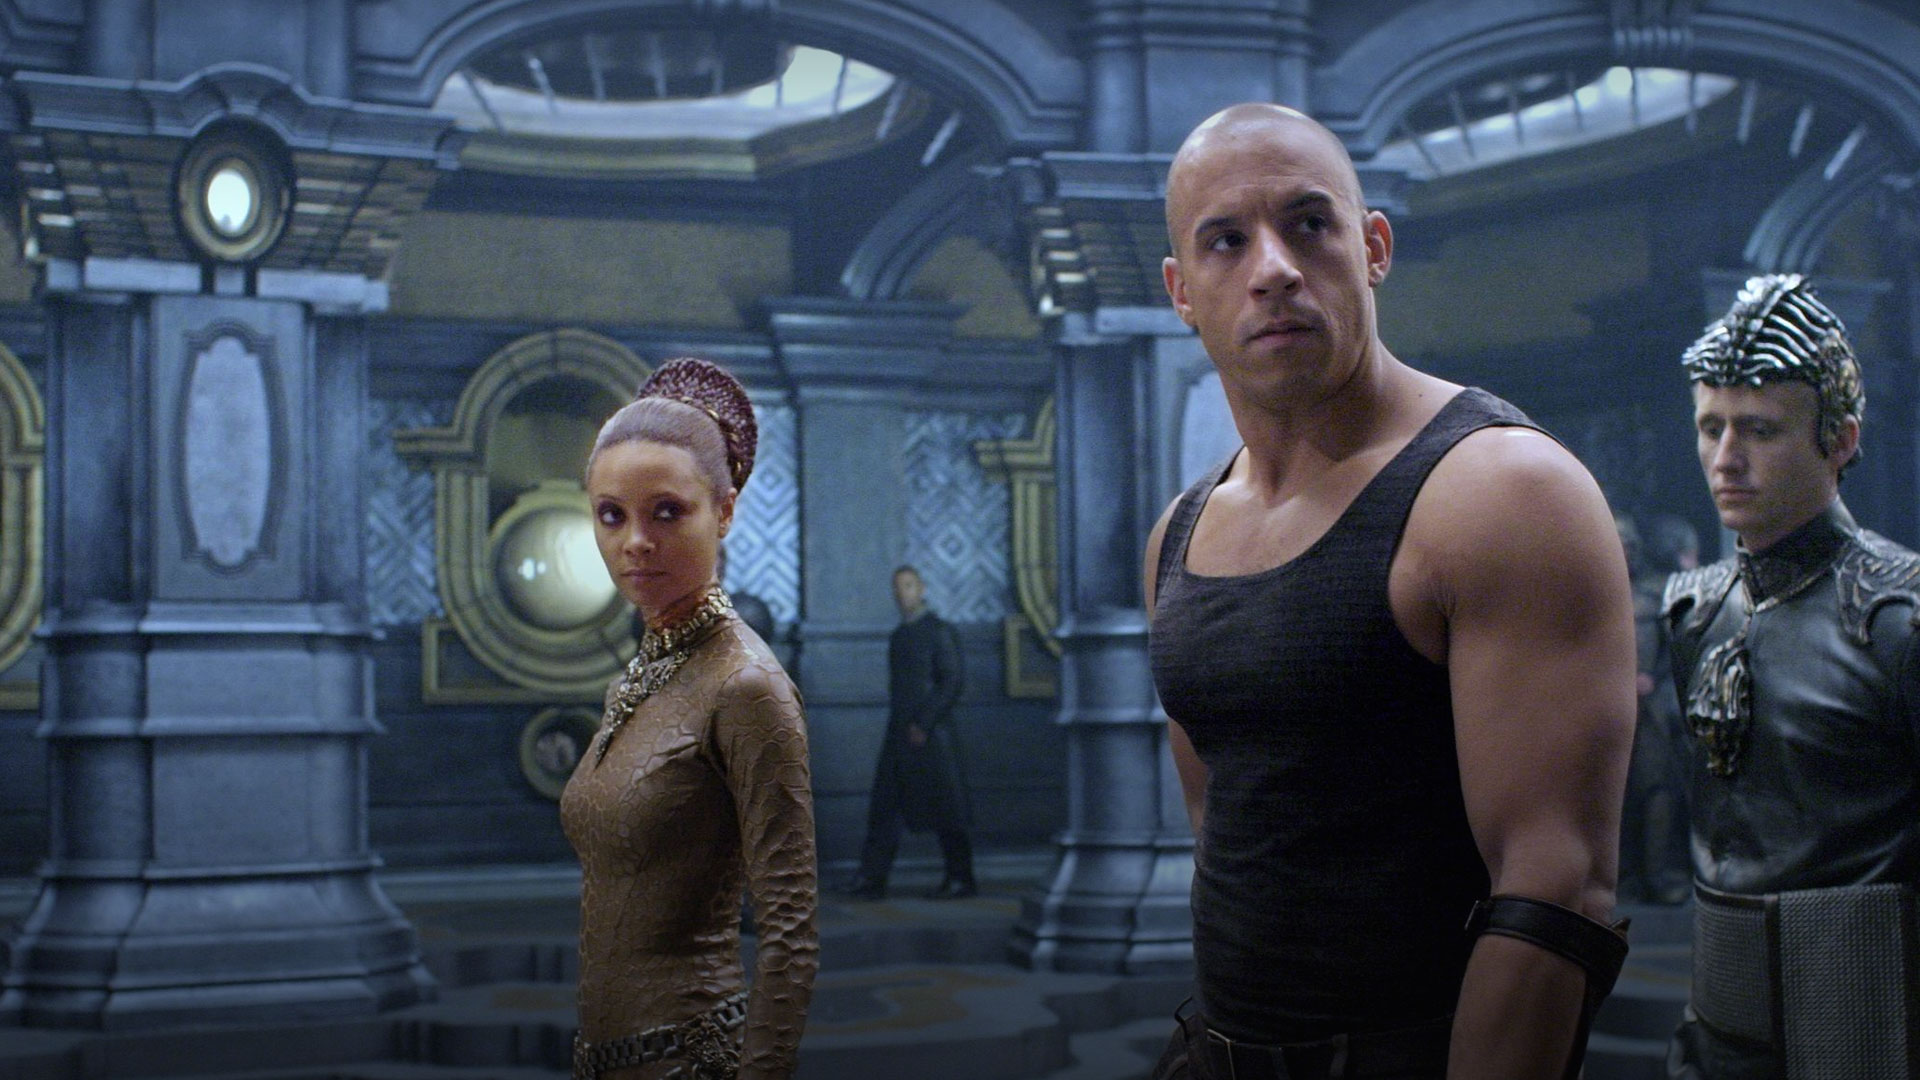 Thandie Newton and Vin Diesel in The Chronicles of Riddick